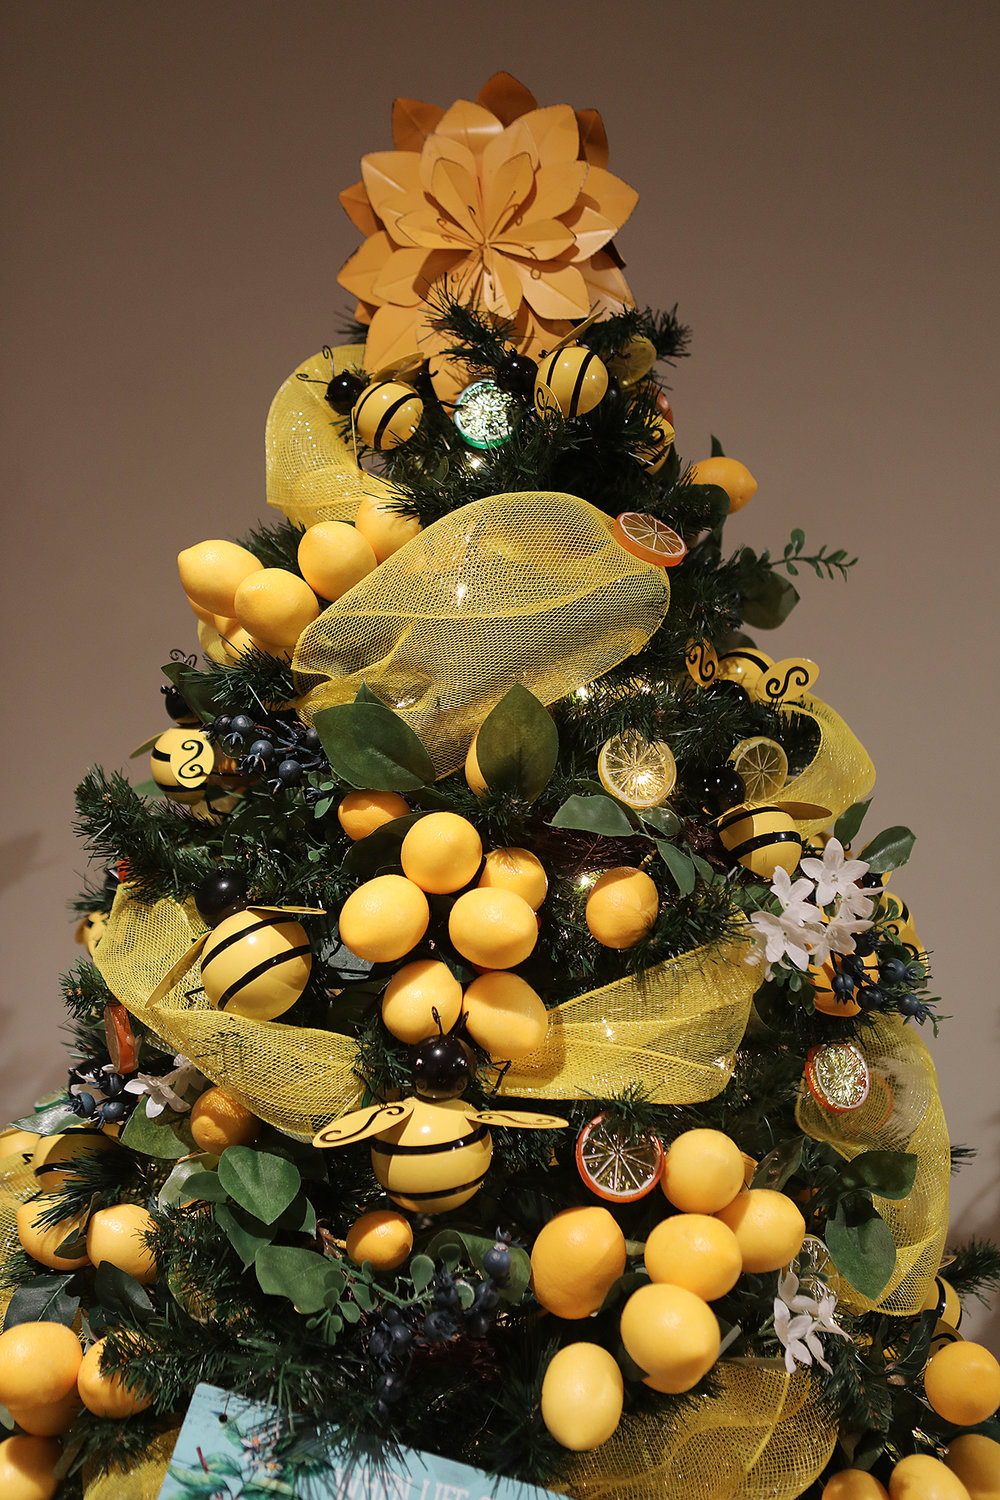 The Grey Lady Apiary tree, "When Life Gives You Lemons..." Nantucket Historical Association Festival of Trees at the Whaling Museum.